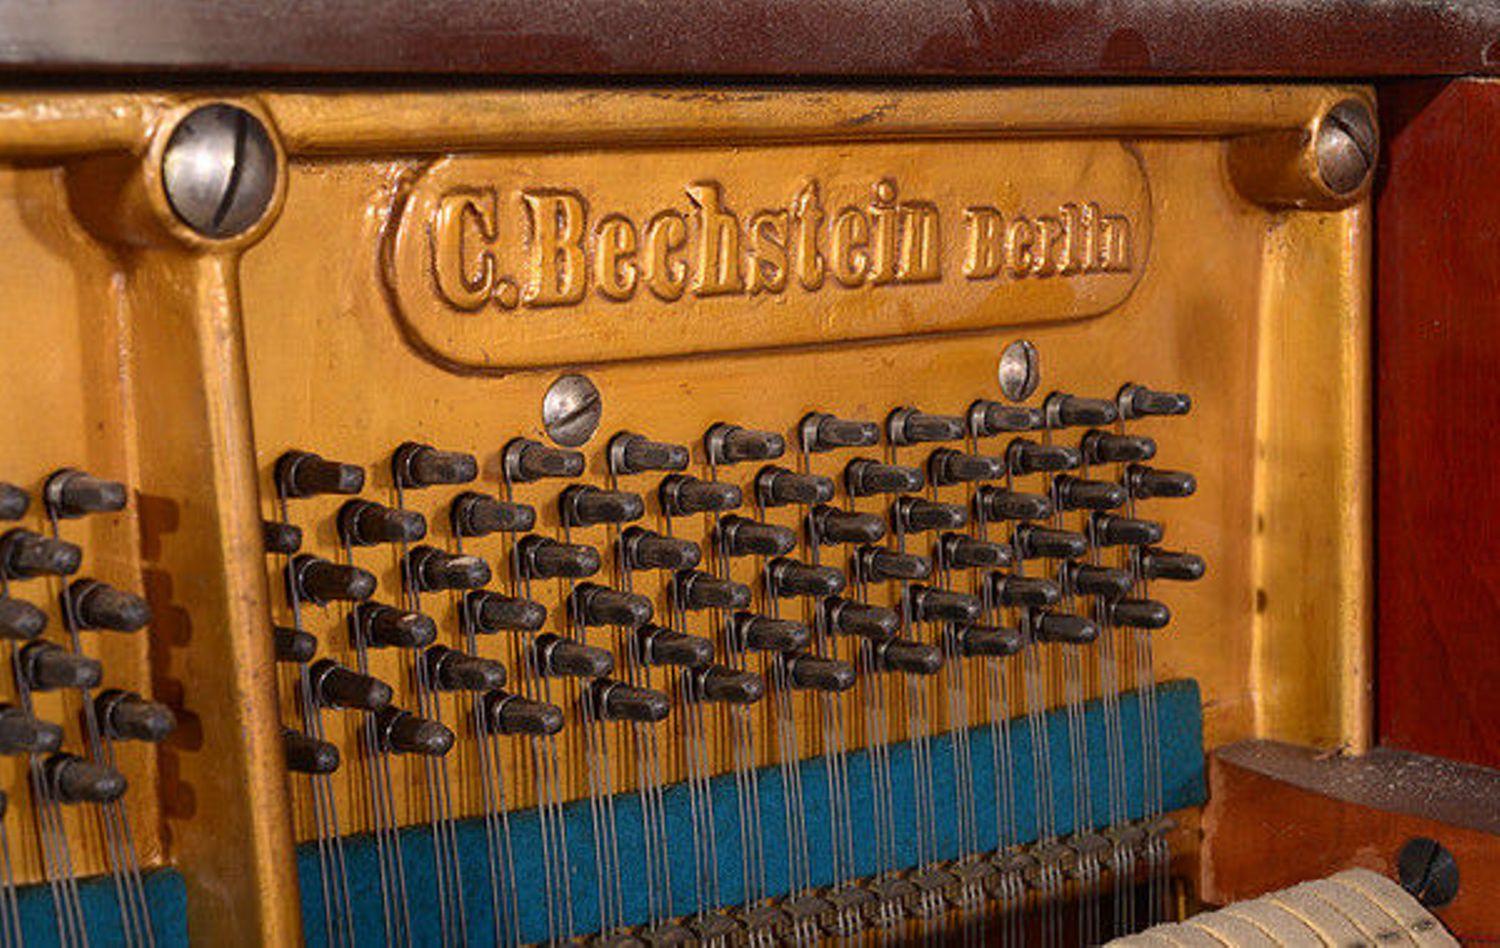 German Early 20th Century Upright Piano Manufactured by C. Bechstein For Sale